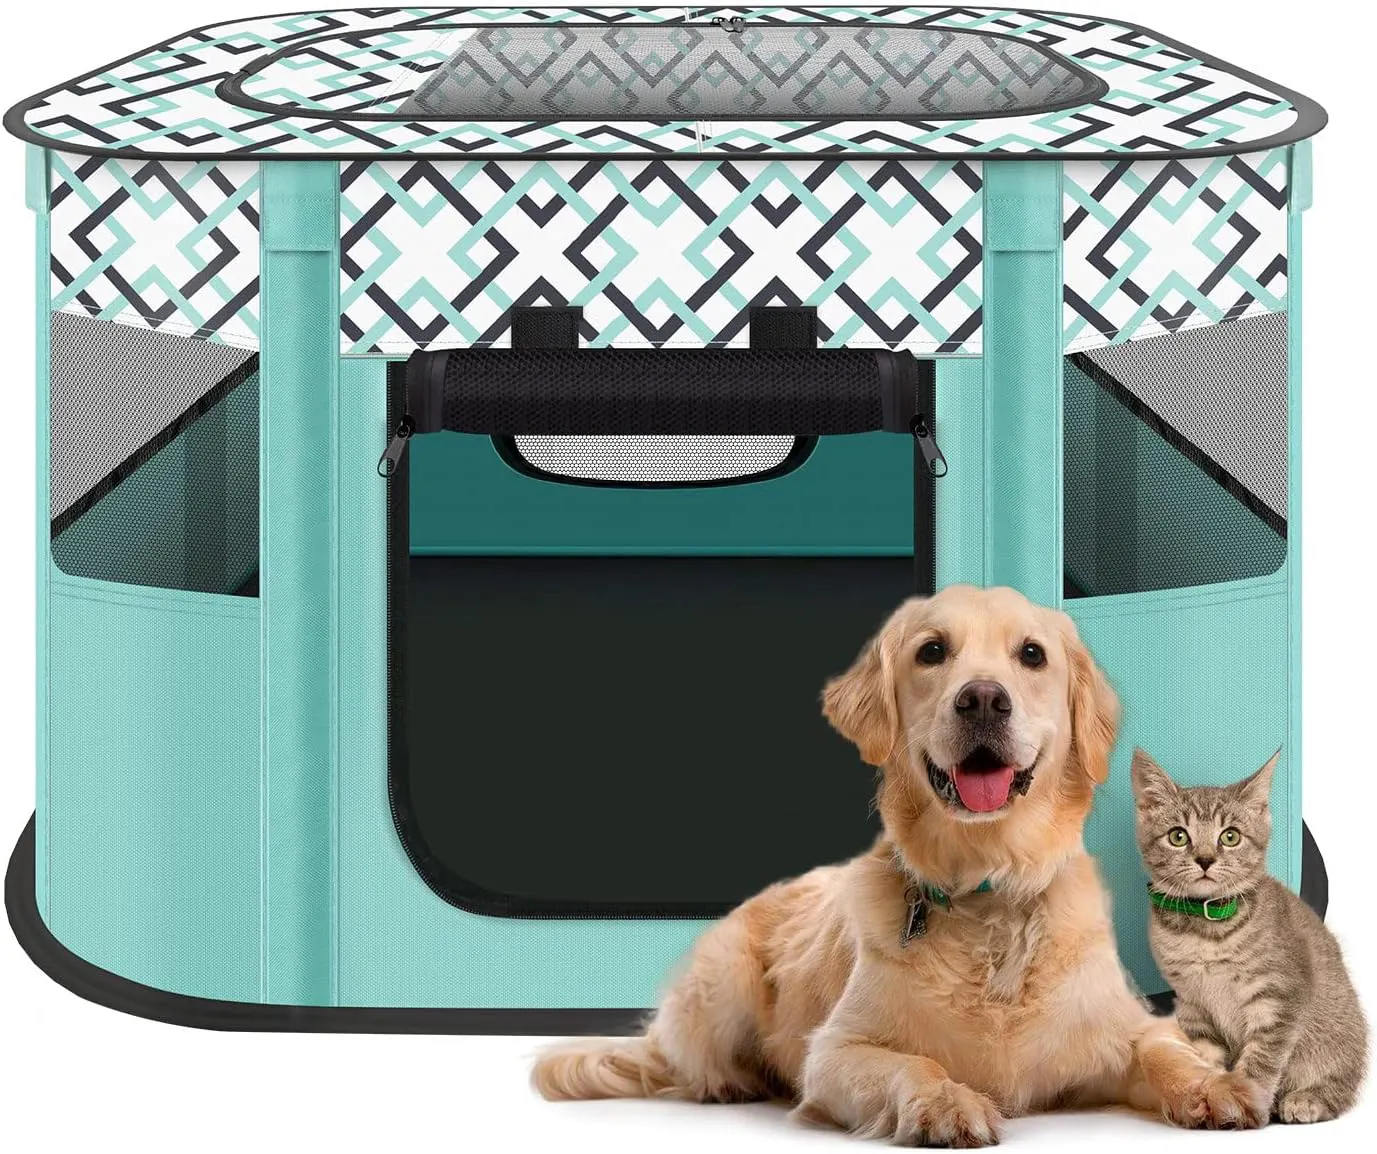 600D Oxford Indoor Portable Pet Playpen Cage Kitten Puppy Cat Delivery Room Isolation Room For Dogs